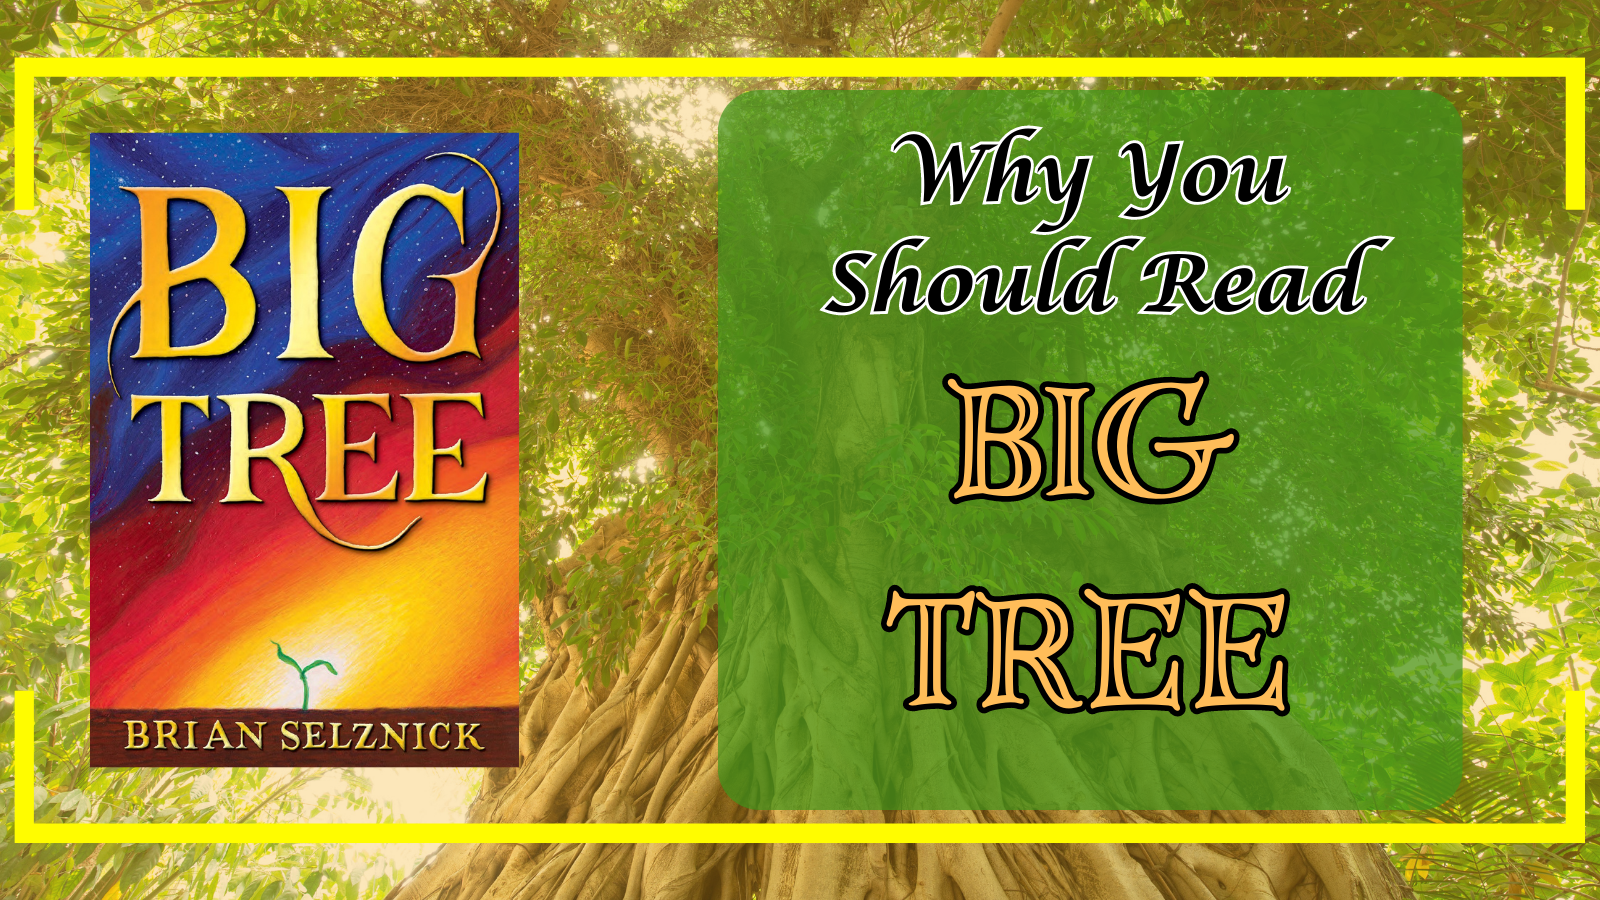 Why You Should Read Big Tree